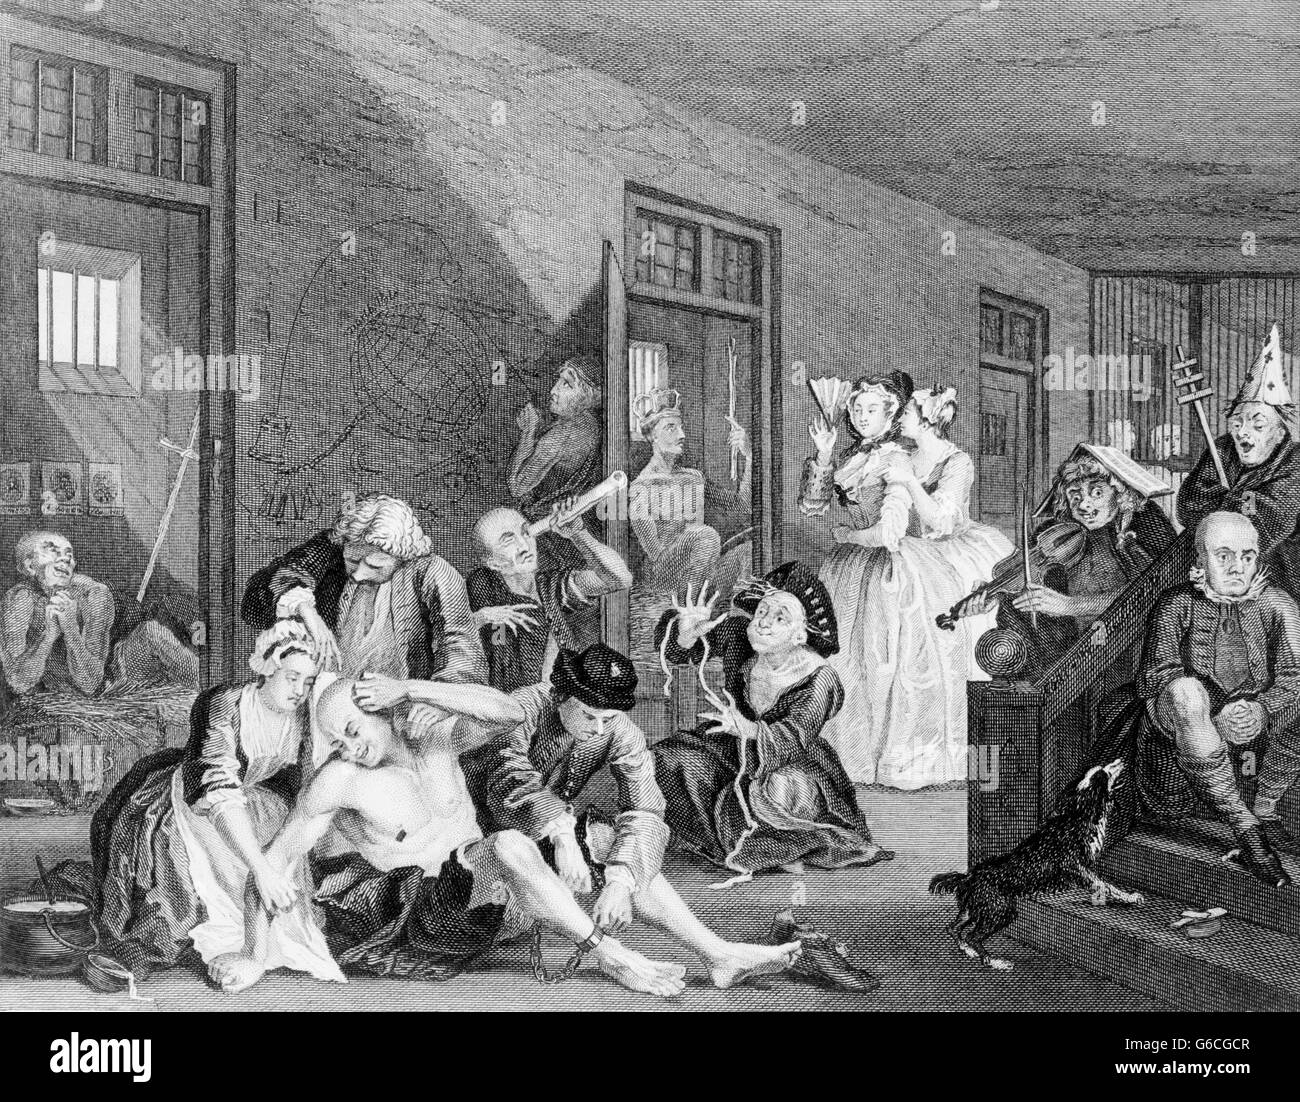 1730s THE MADHOUSE 18th CENTURY BEDLAM INSANE ASYLUM FROM A PAINTING BY WILLIAM HOGARTH CIRCA 1735 Stock Photo